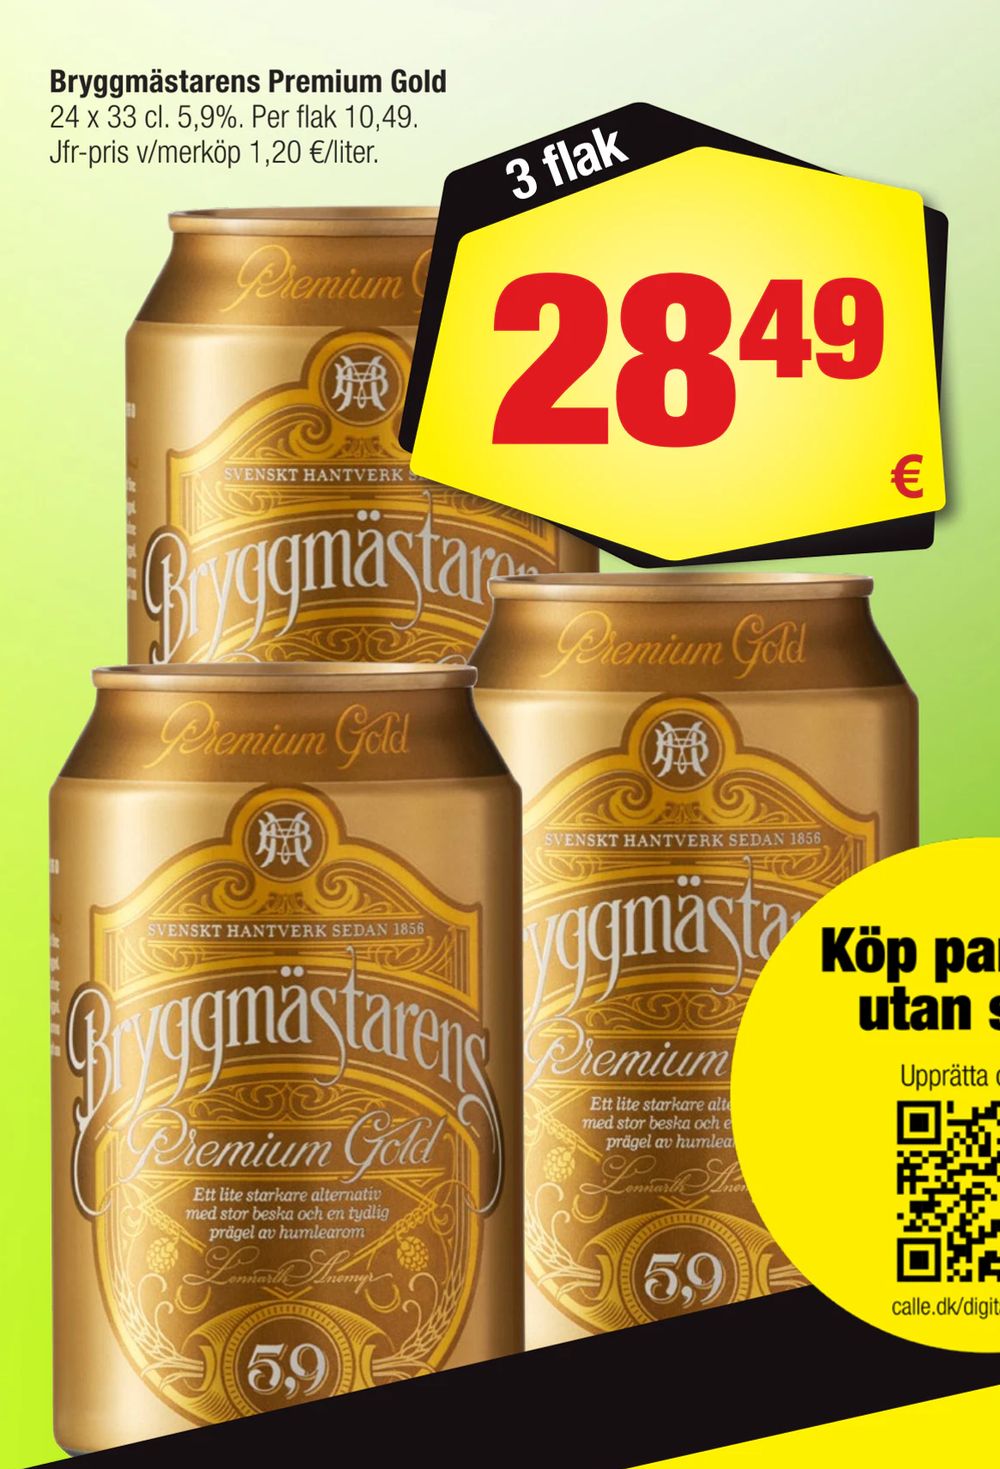 Deals on Bryggmästarens Premium Gold from Calle at 28,49 €